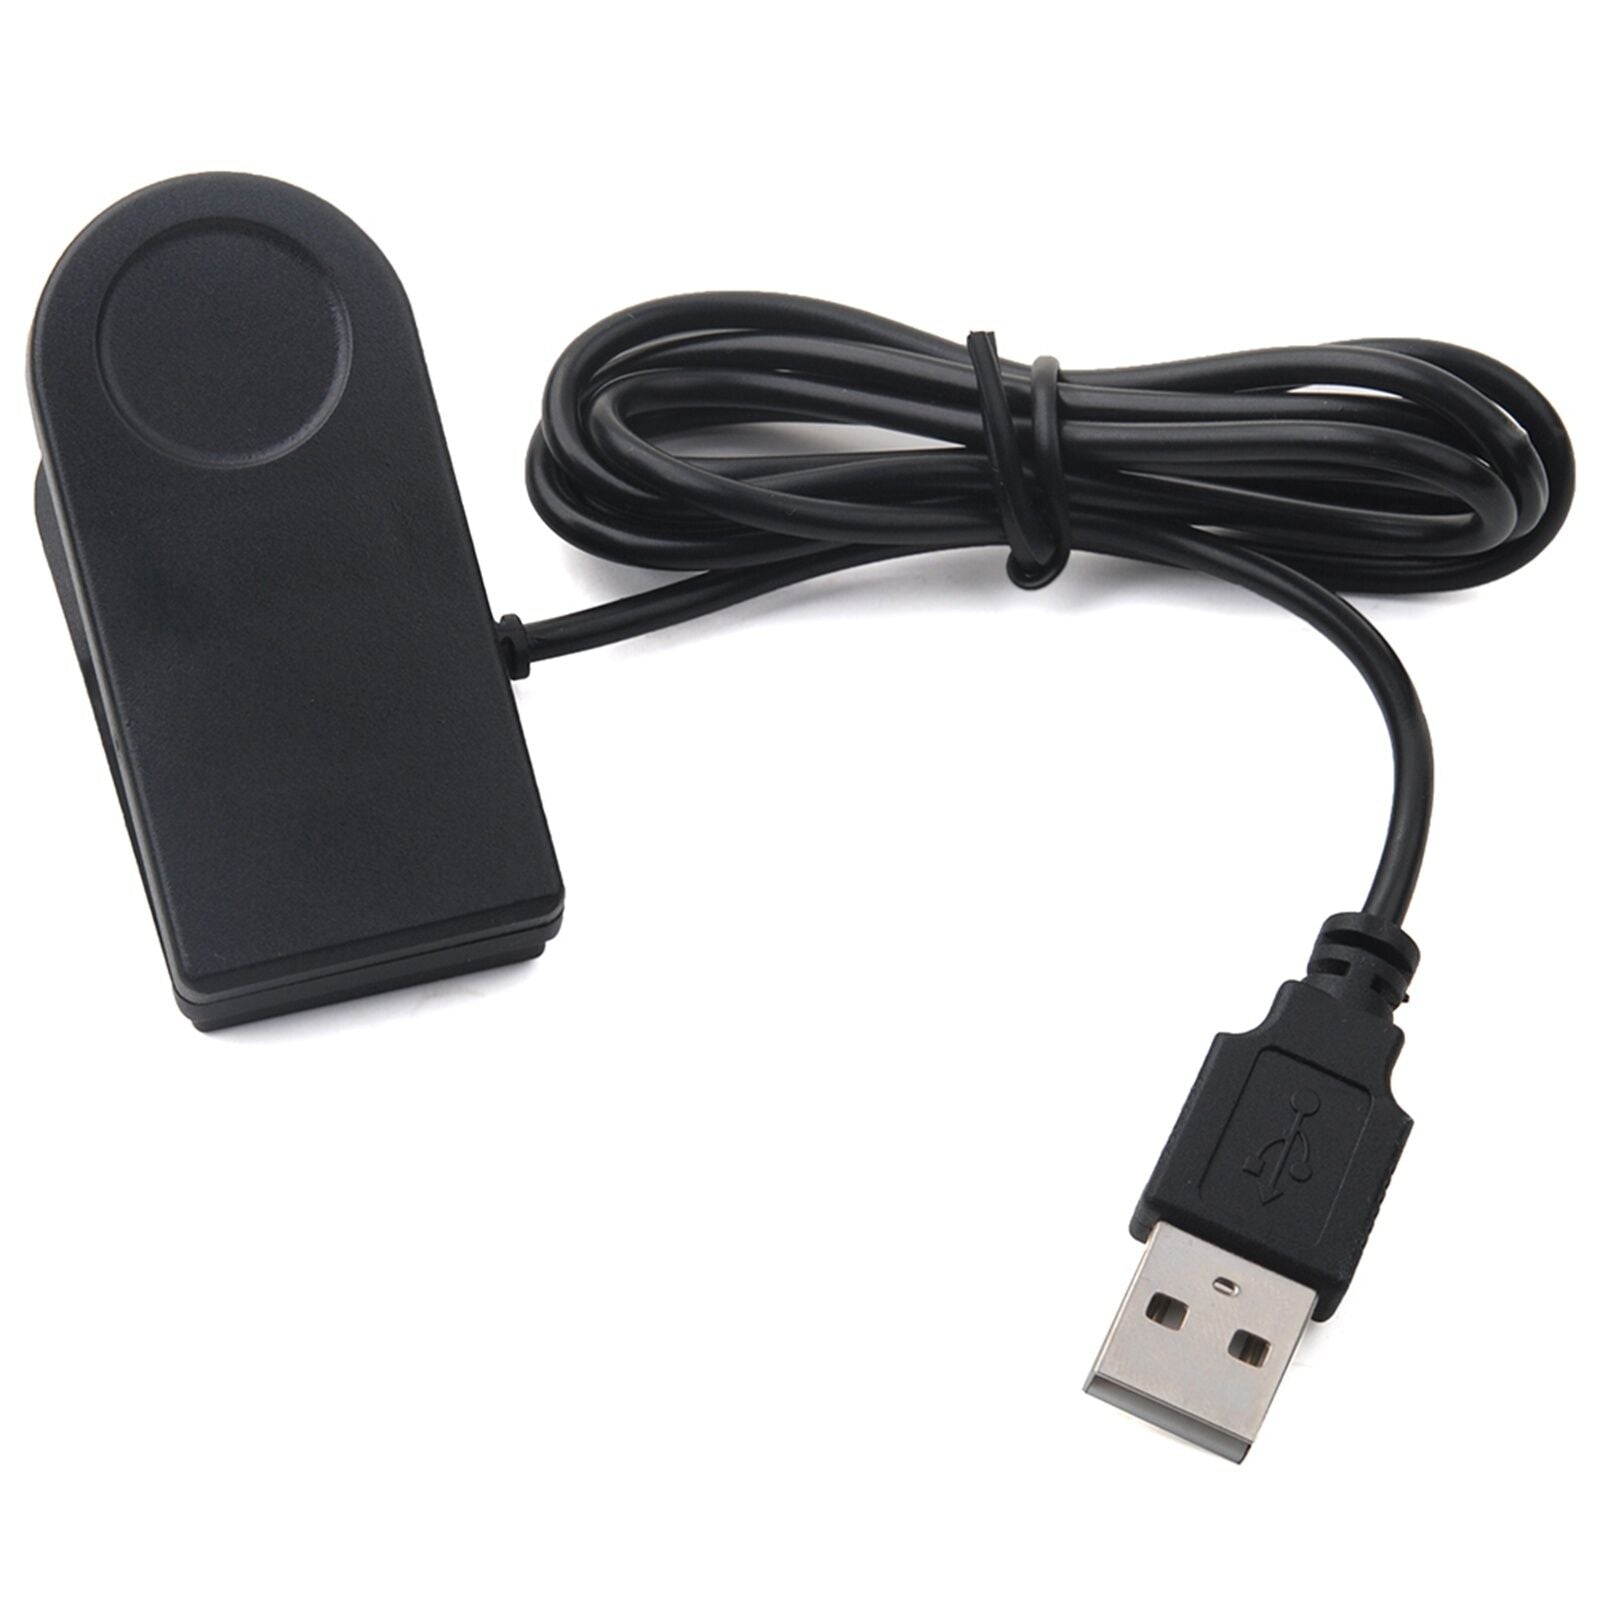 USB Charger Clip for Garmin Forerunner 405CX 405 910XT 310XT Watch With Cable